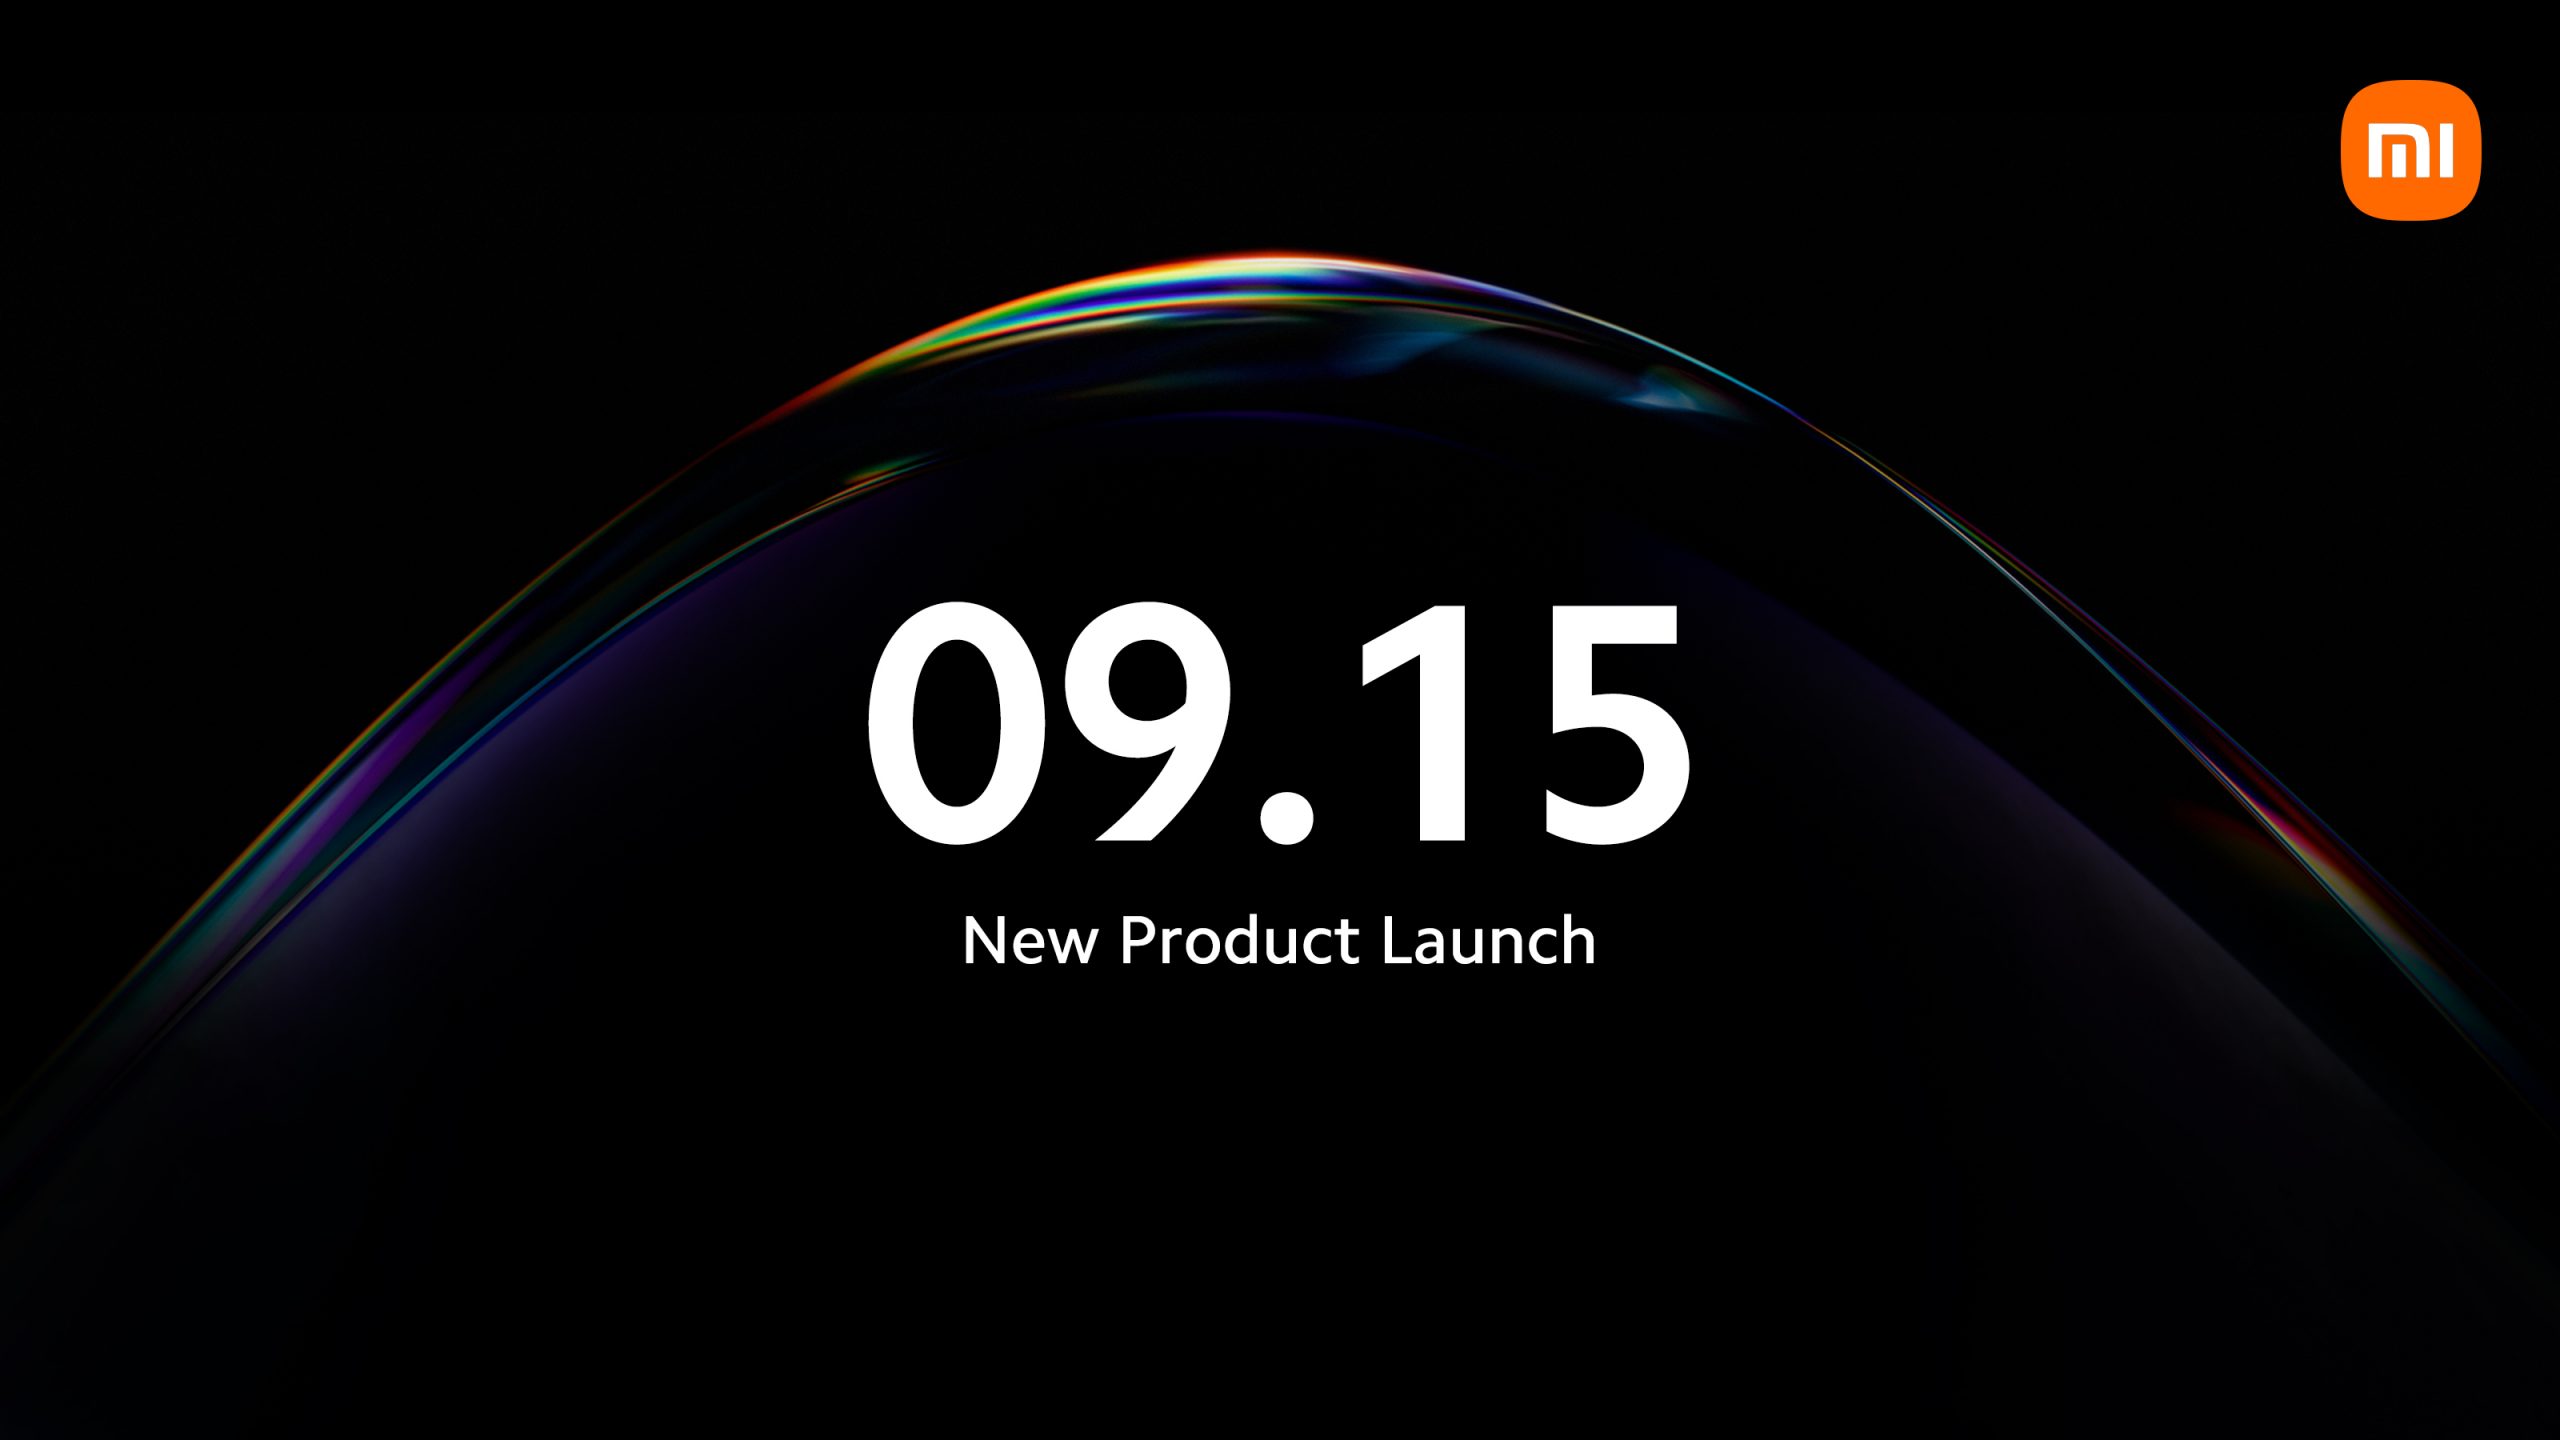 Xiaomi has scheduled a global launch event on September 15th